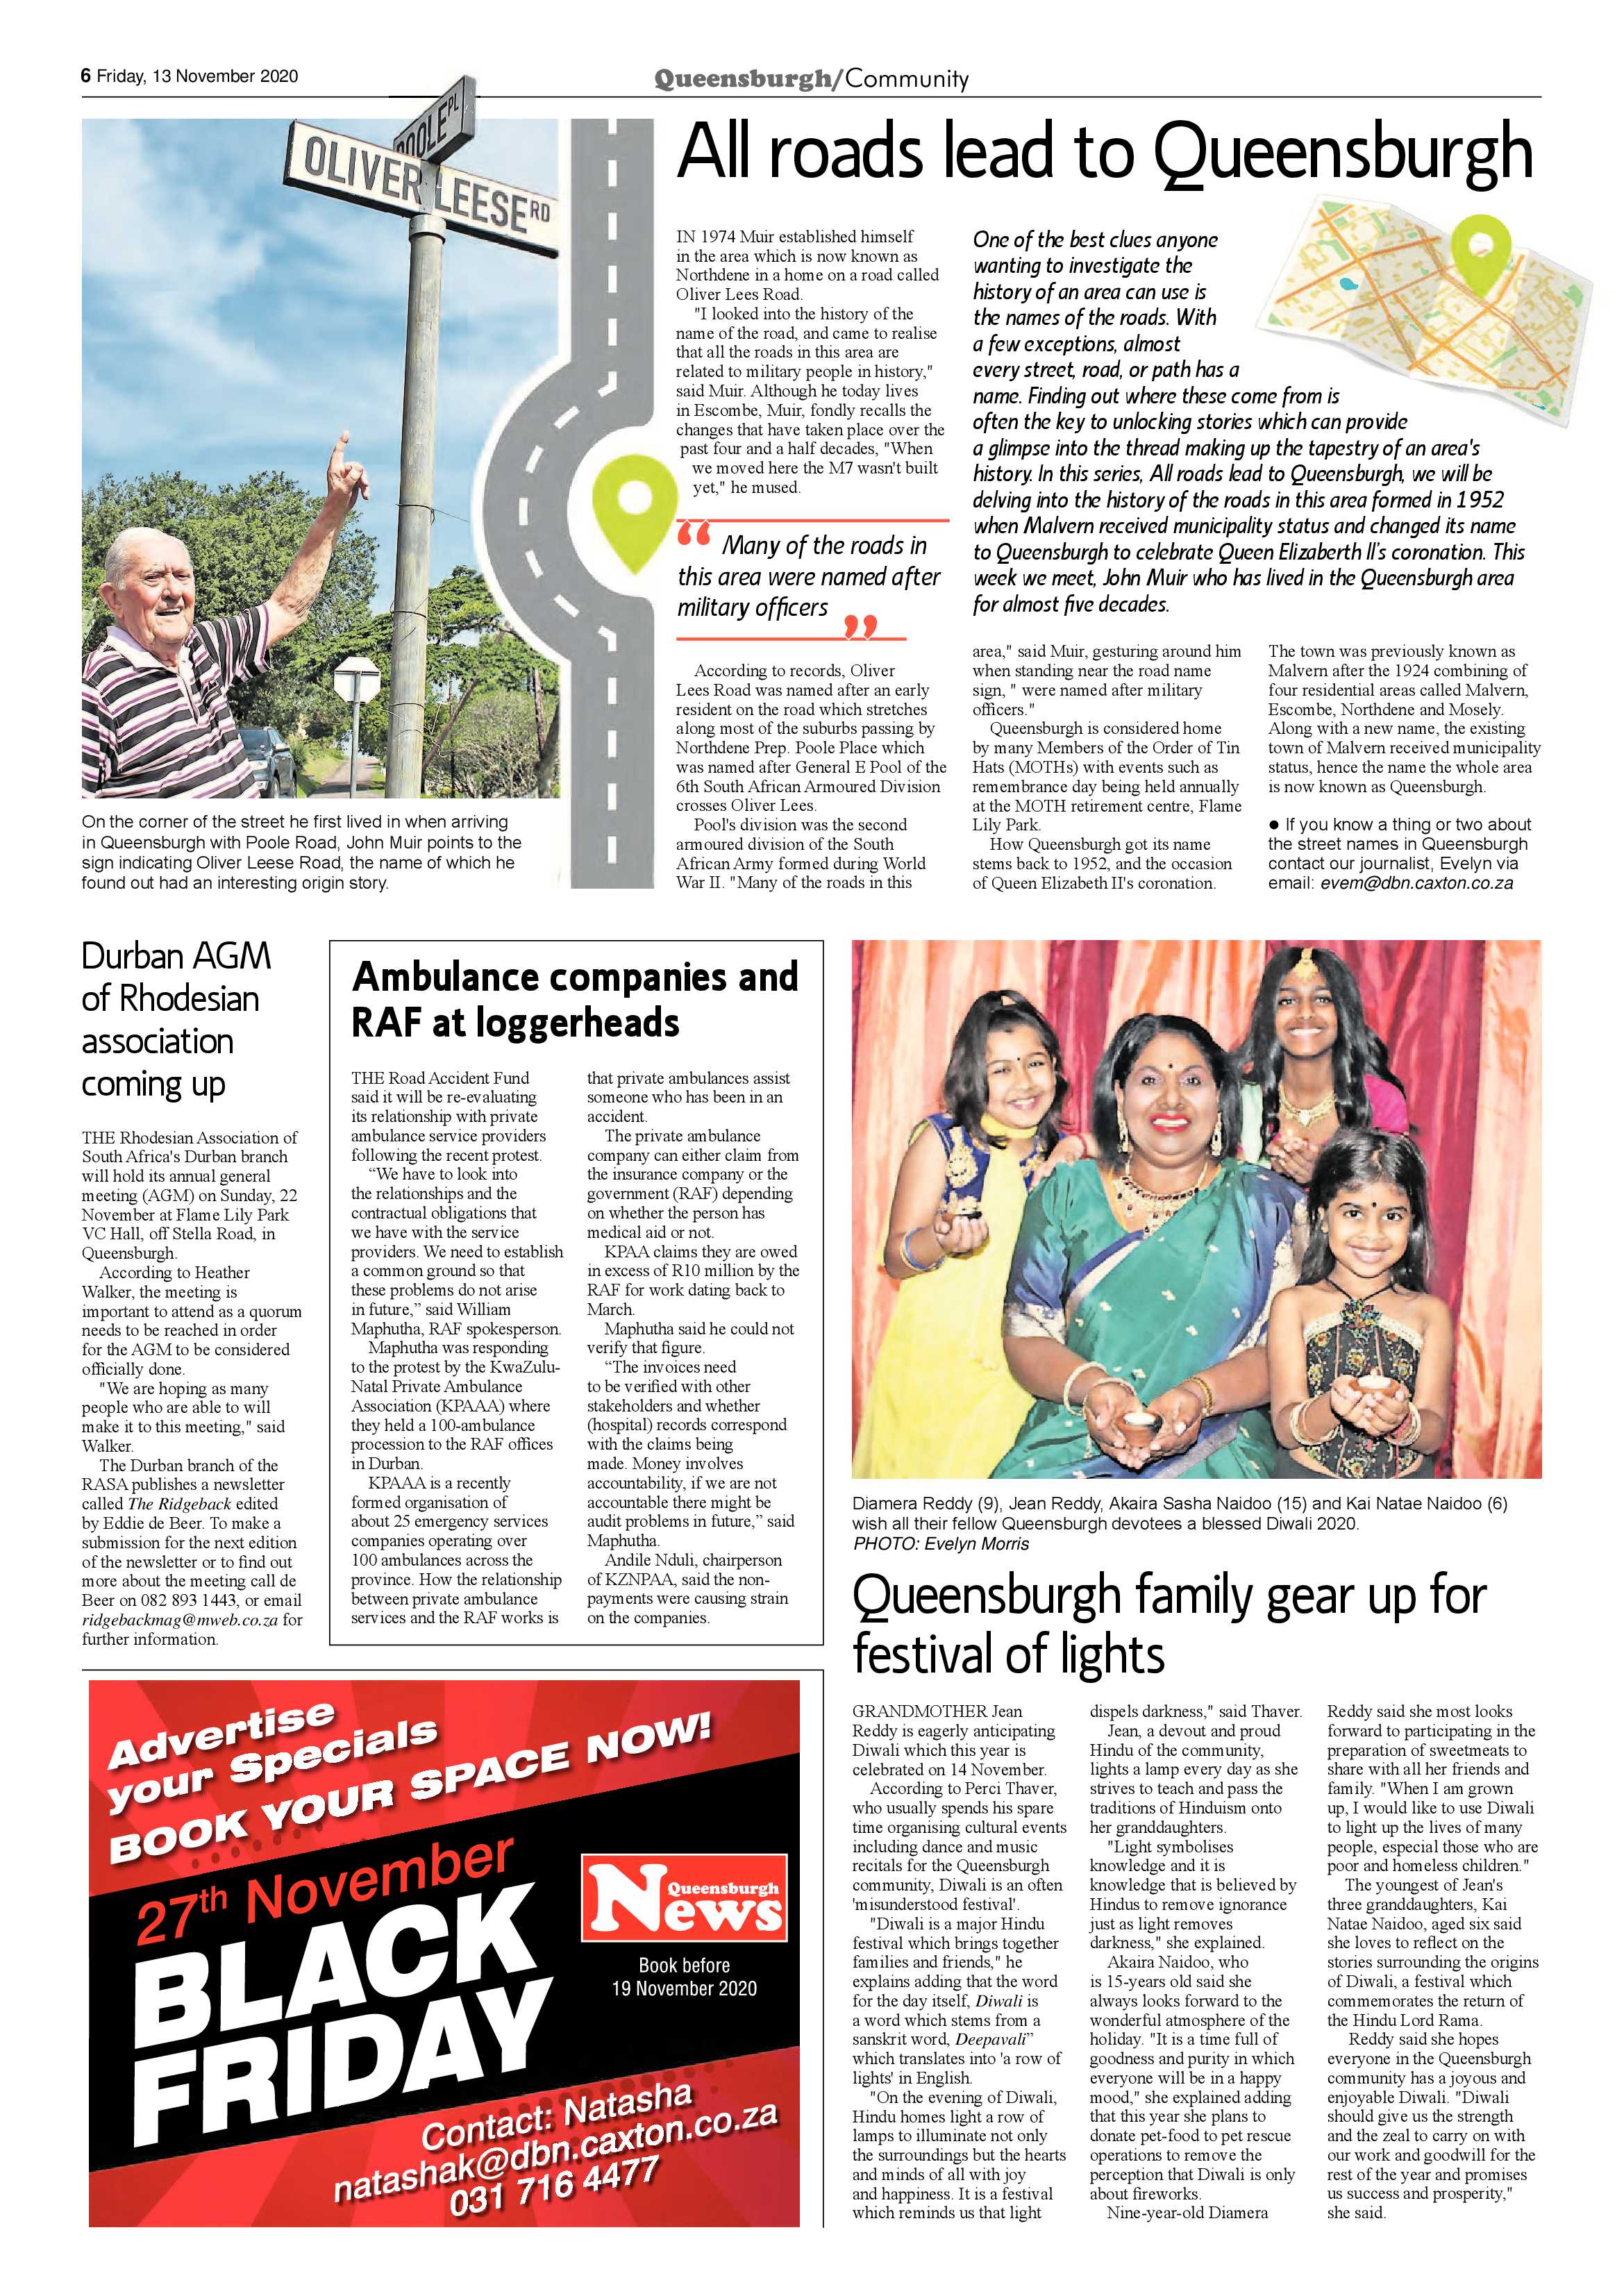 Queensburgh News 13 November 2020 page 6